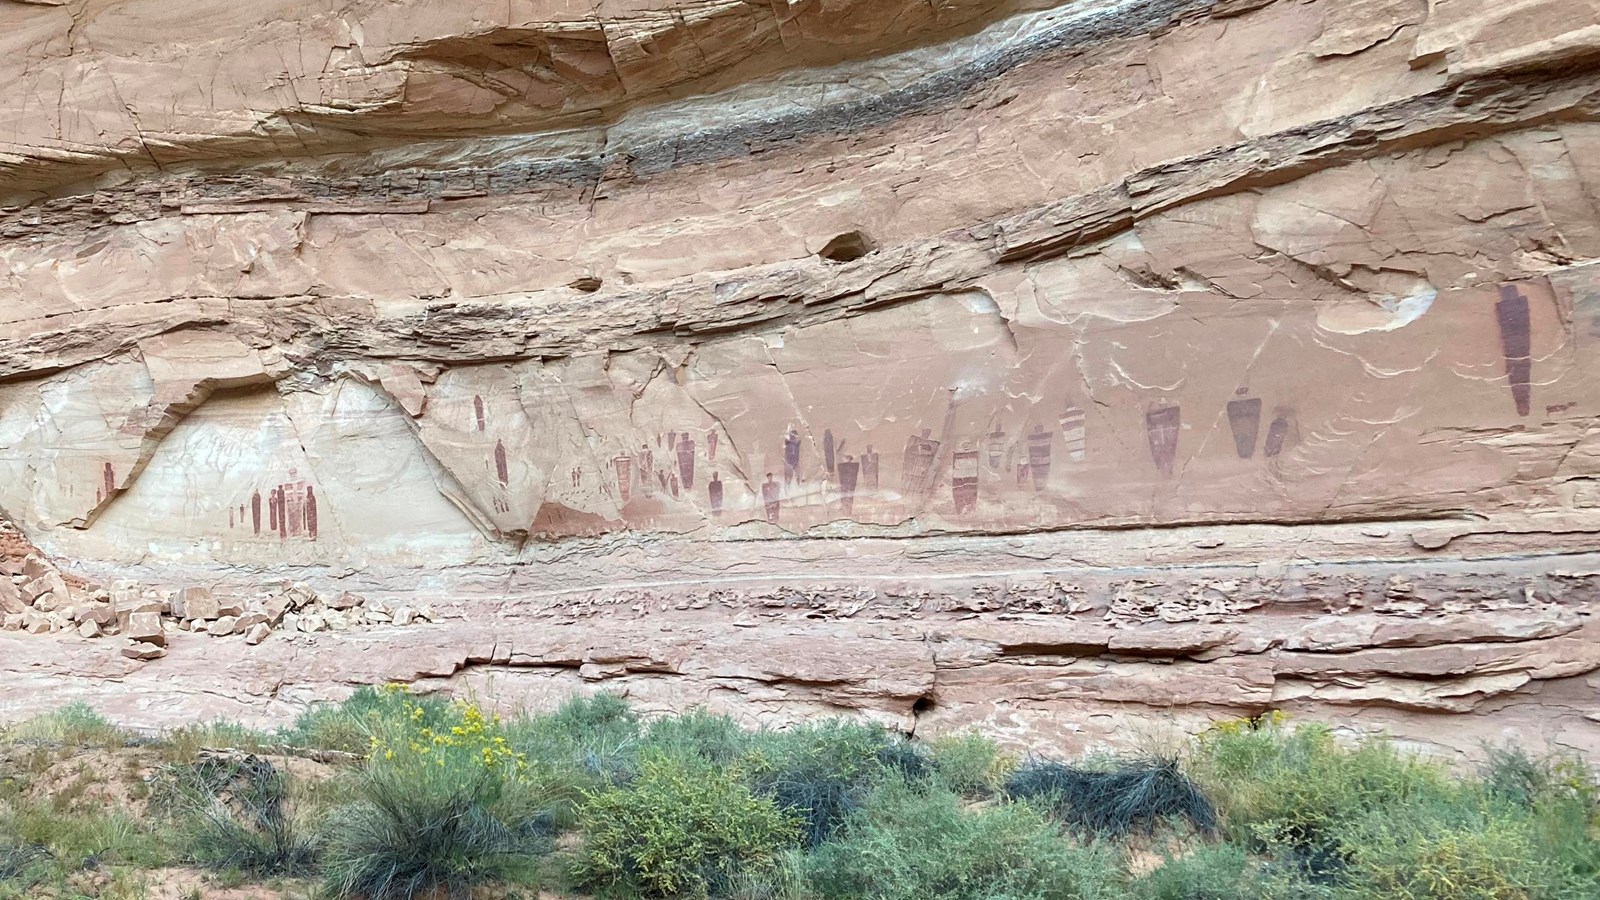 painted person-like figures in red and brown on a long sandstone wall